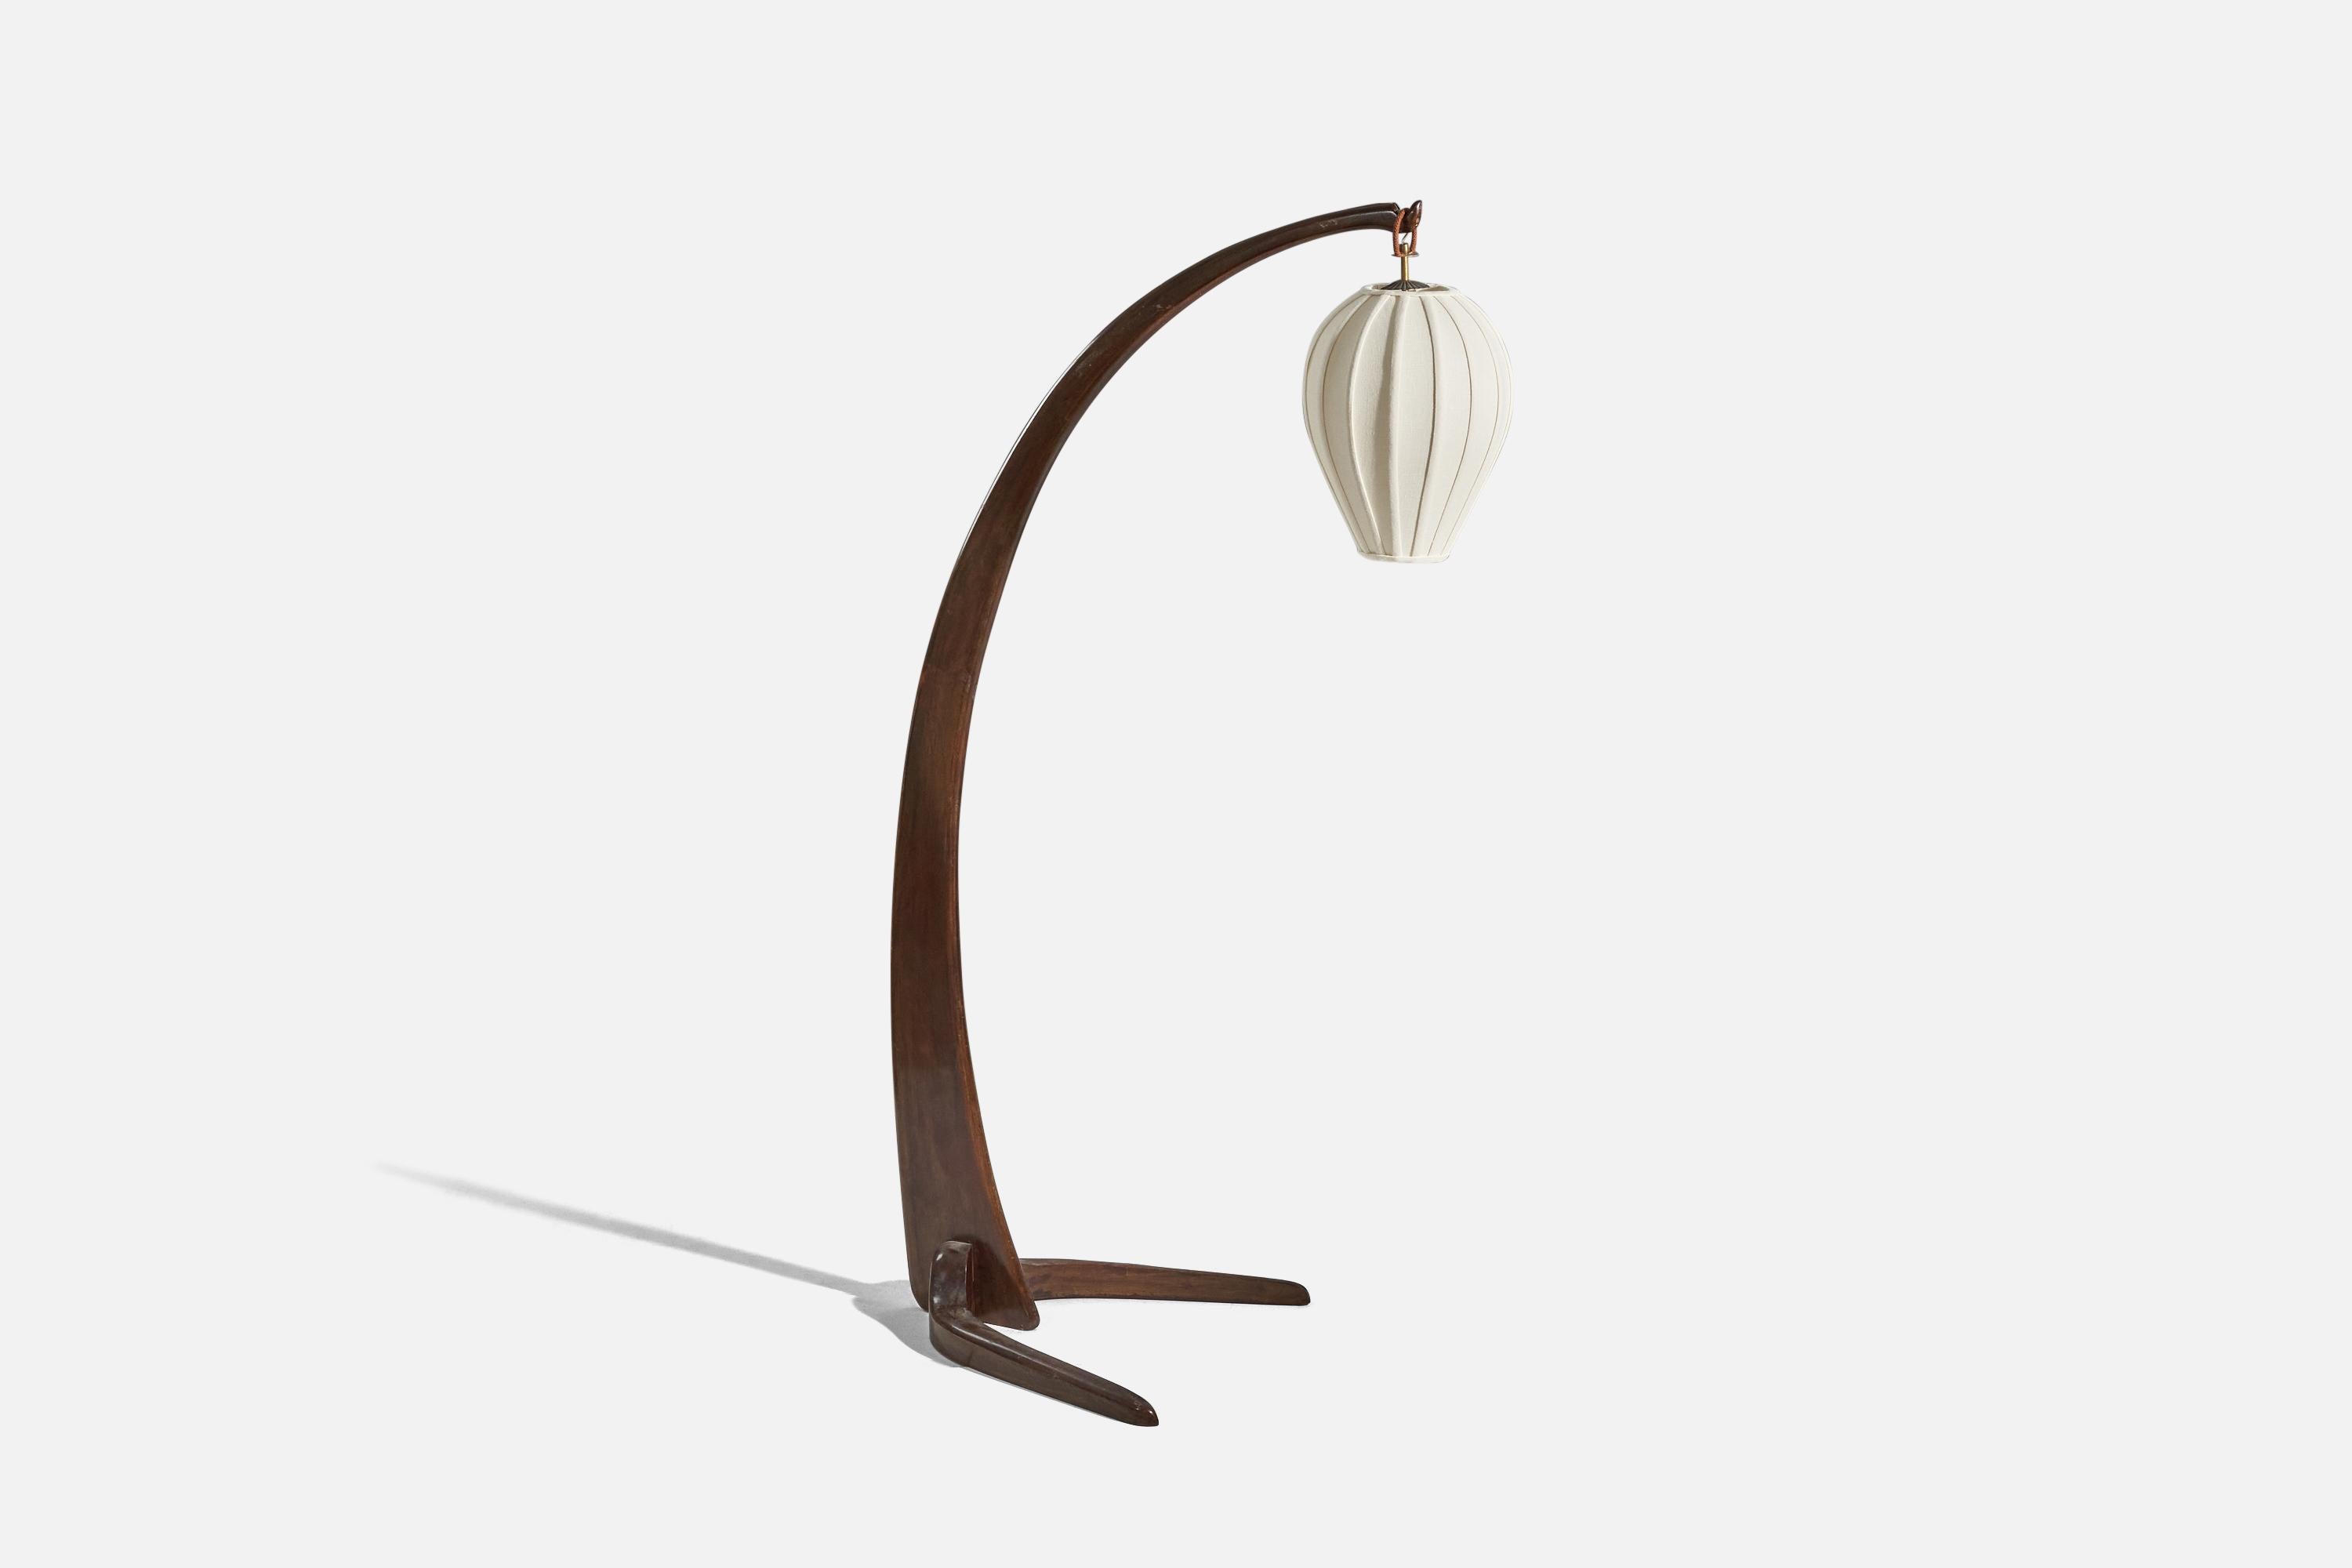 A walnut and fabric floor lamp designed and produced in Italy, 1940s.

Sold with lampshade. 
Stated dimensions refer to the floor lamp with the shade.